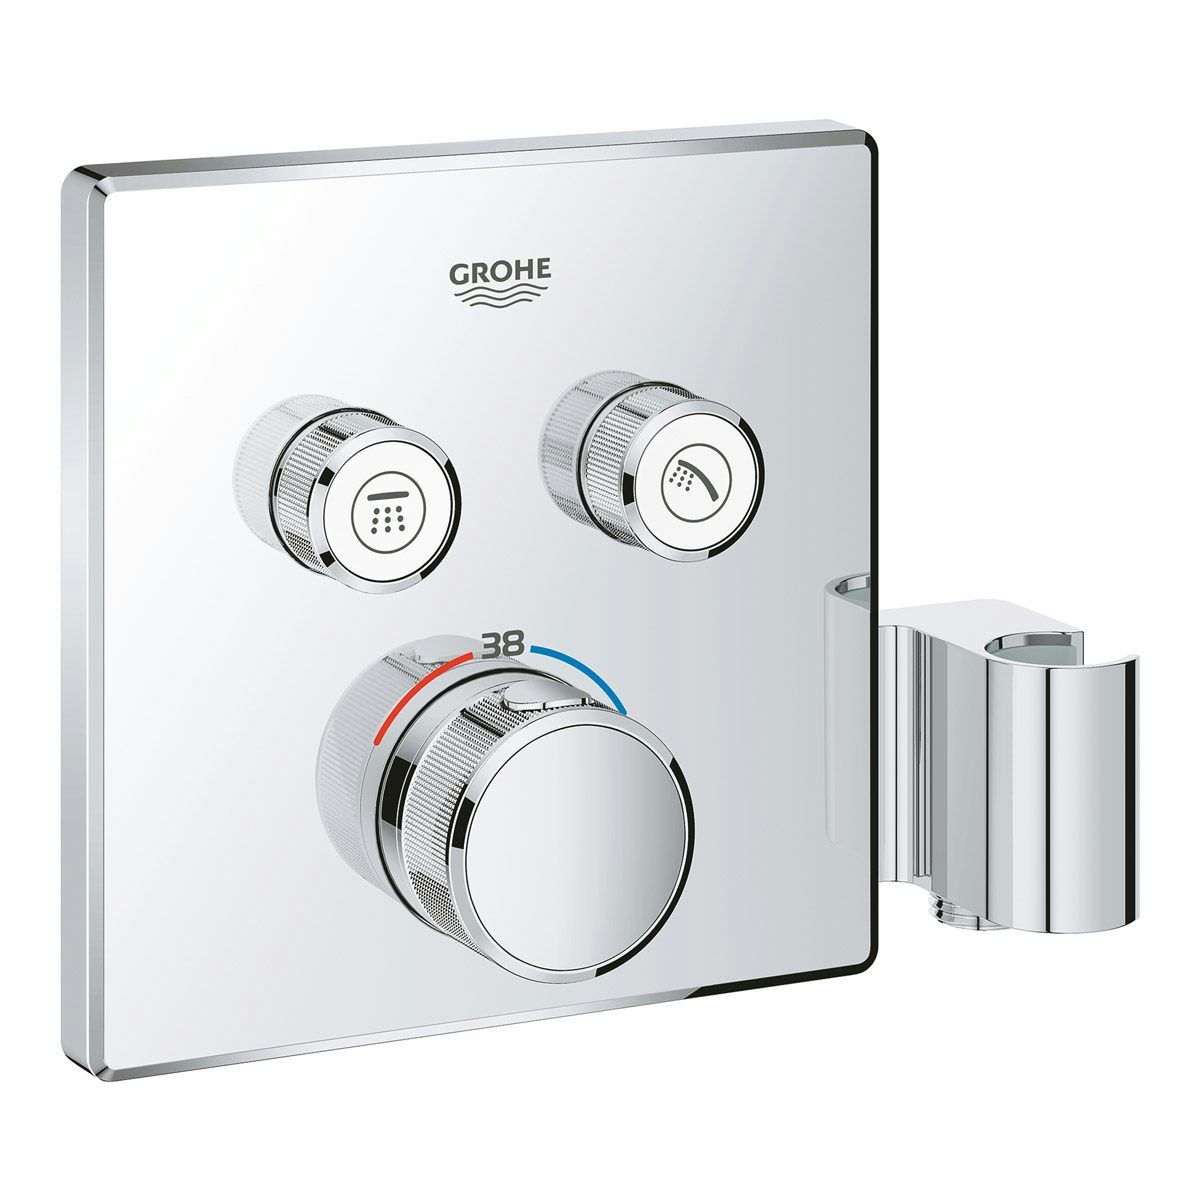 Grohe Grohtherm SmartControl square thermostatic concealed 2 way shower valve trimset with shower holder